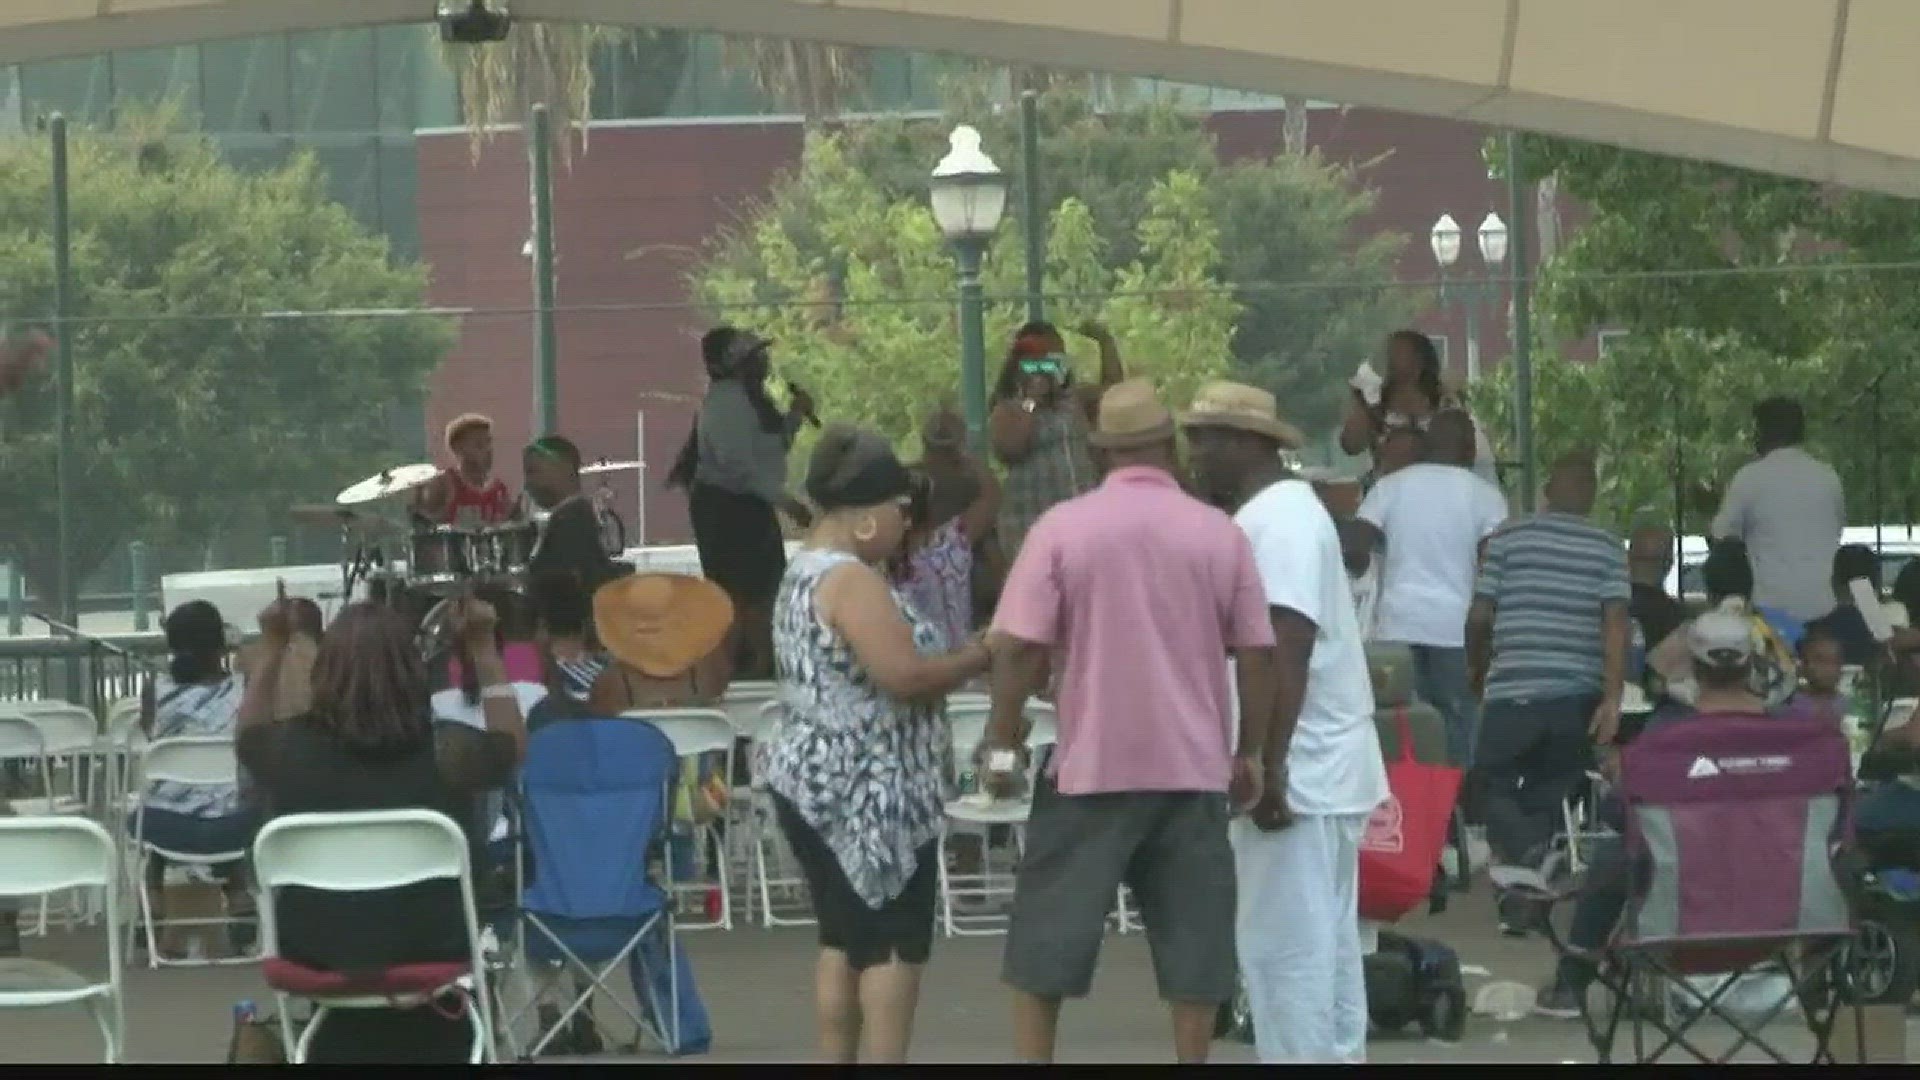 19-year-old Kayla Benjamin was out having fun at the annual Stockton Black Family Day.